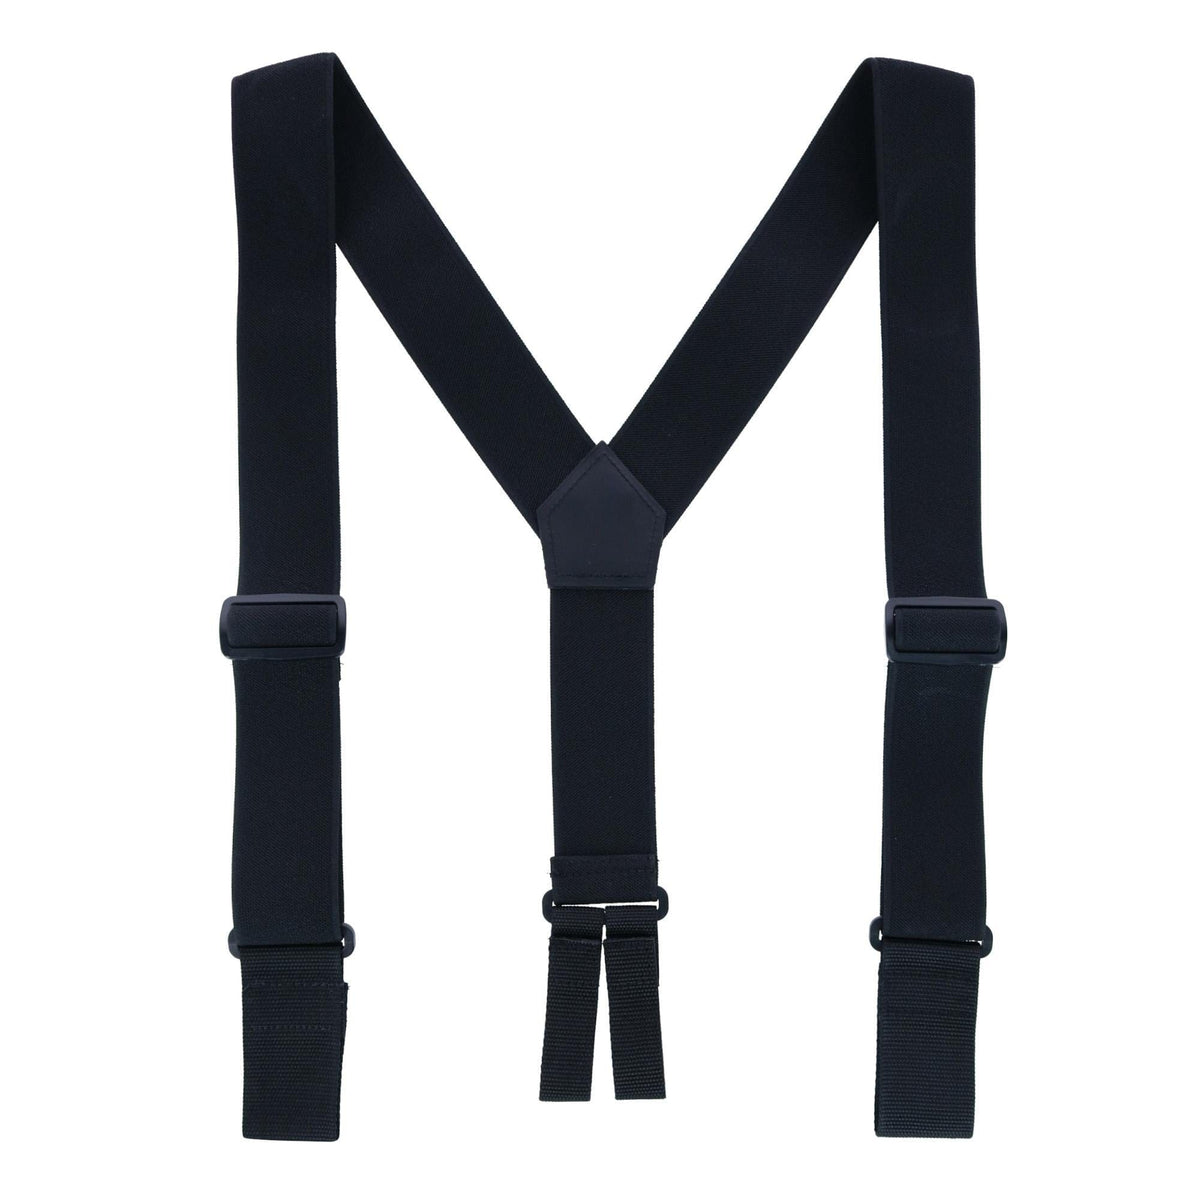 Welch Men's Elastic Cinch Up Y-Back Suspenders (Tall Available), Regular,  Black